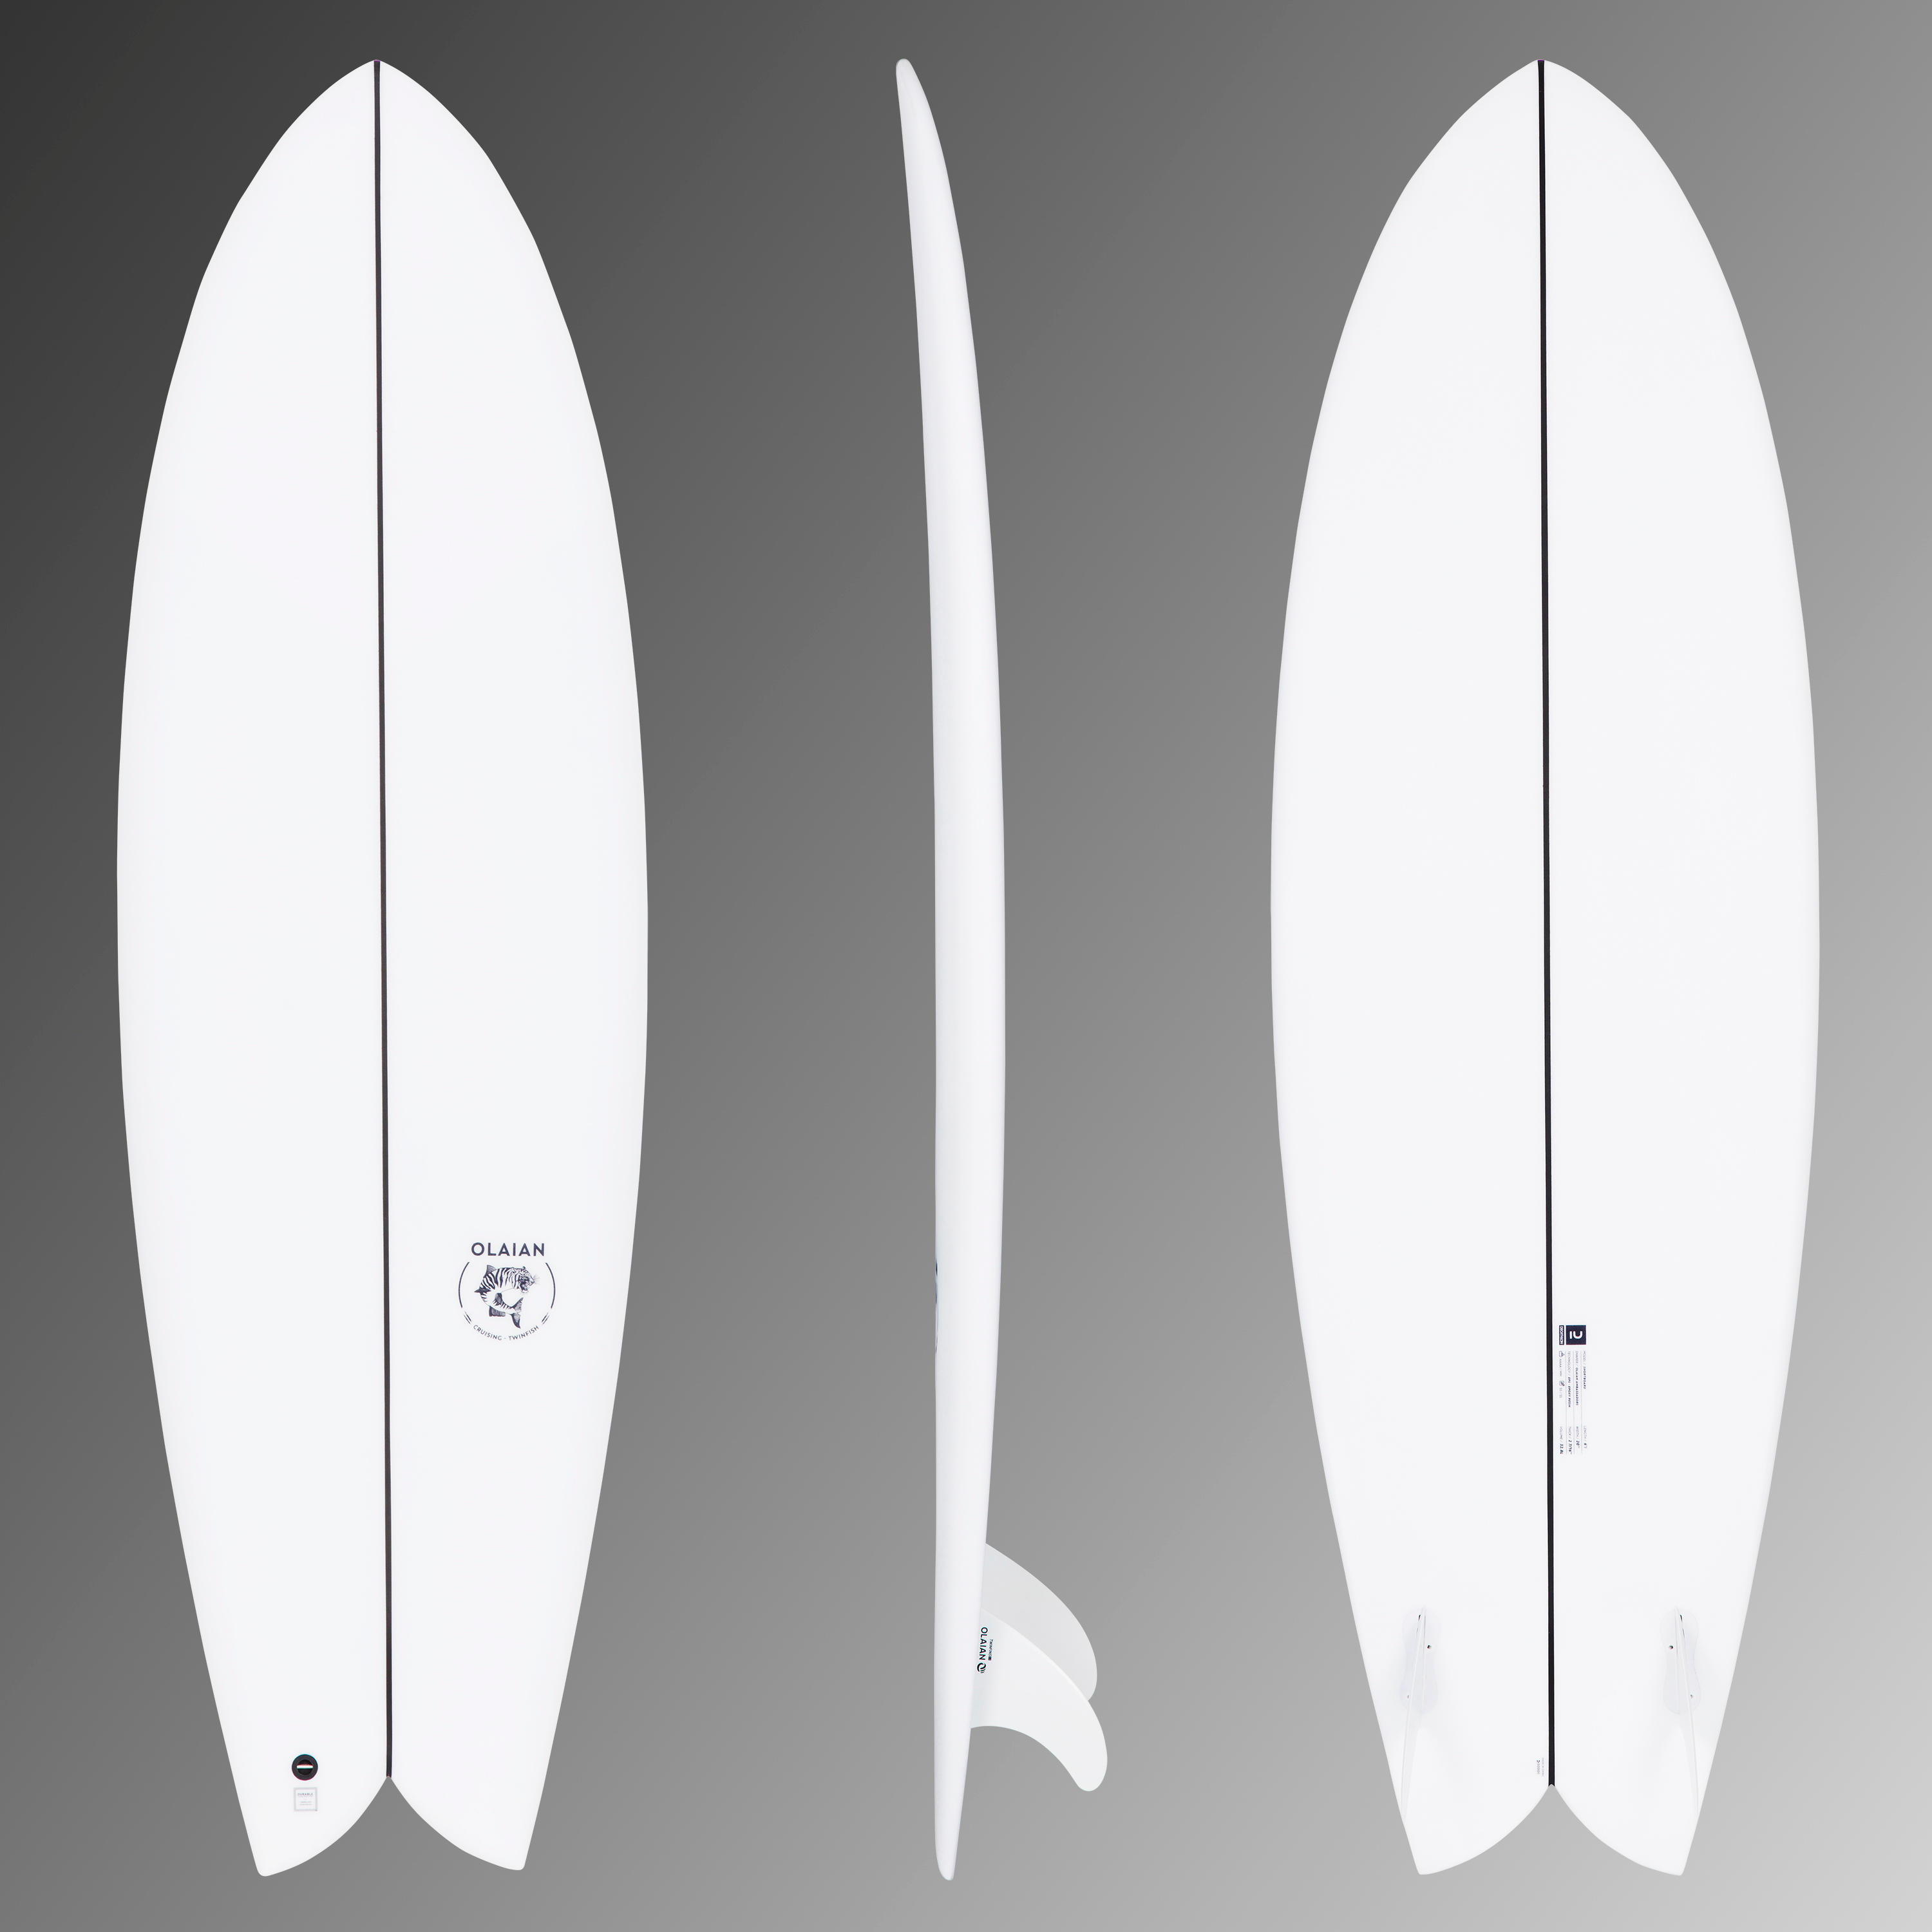 FISH 900 6'1" 42 L. Supplied with 2 twin fins. 1/15